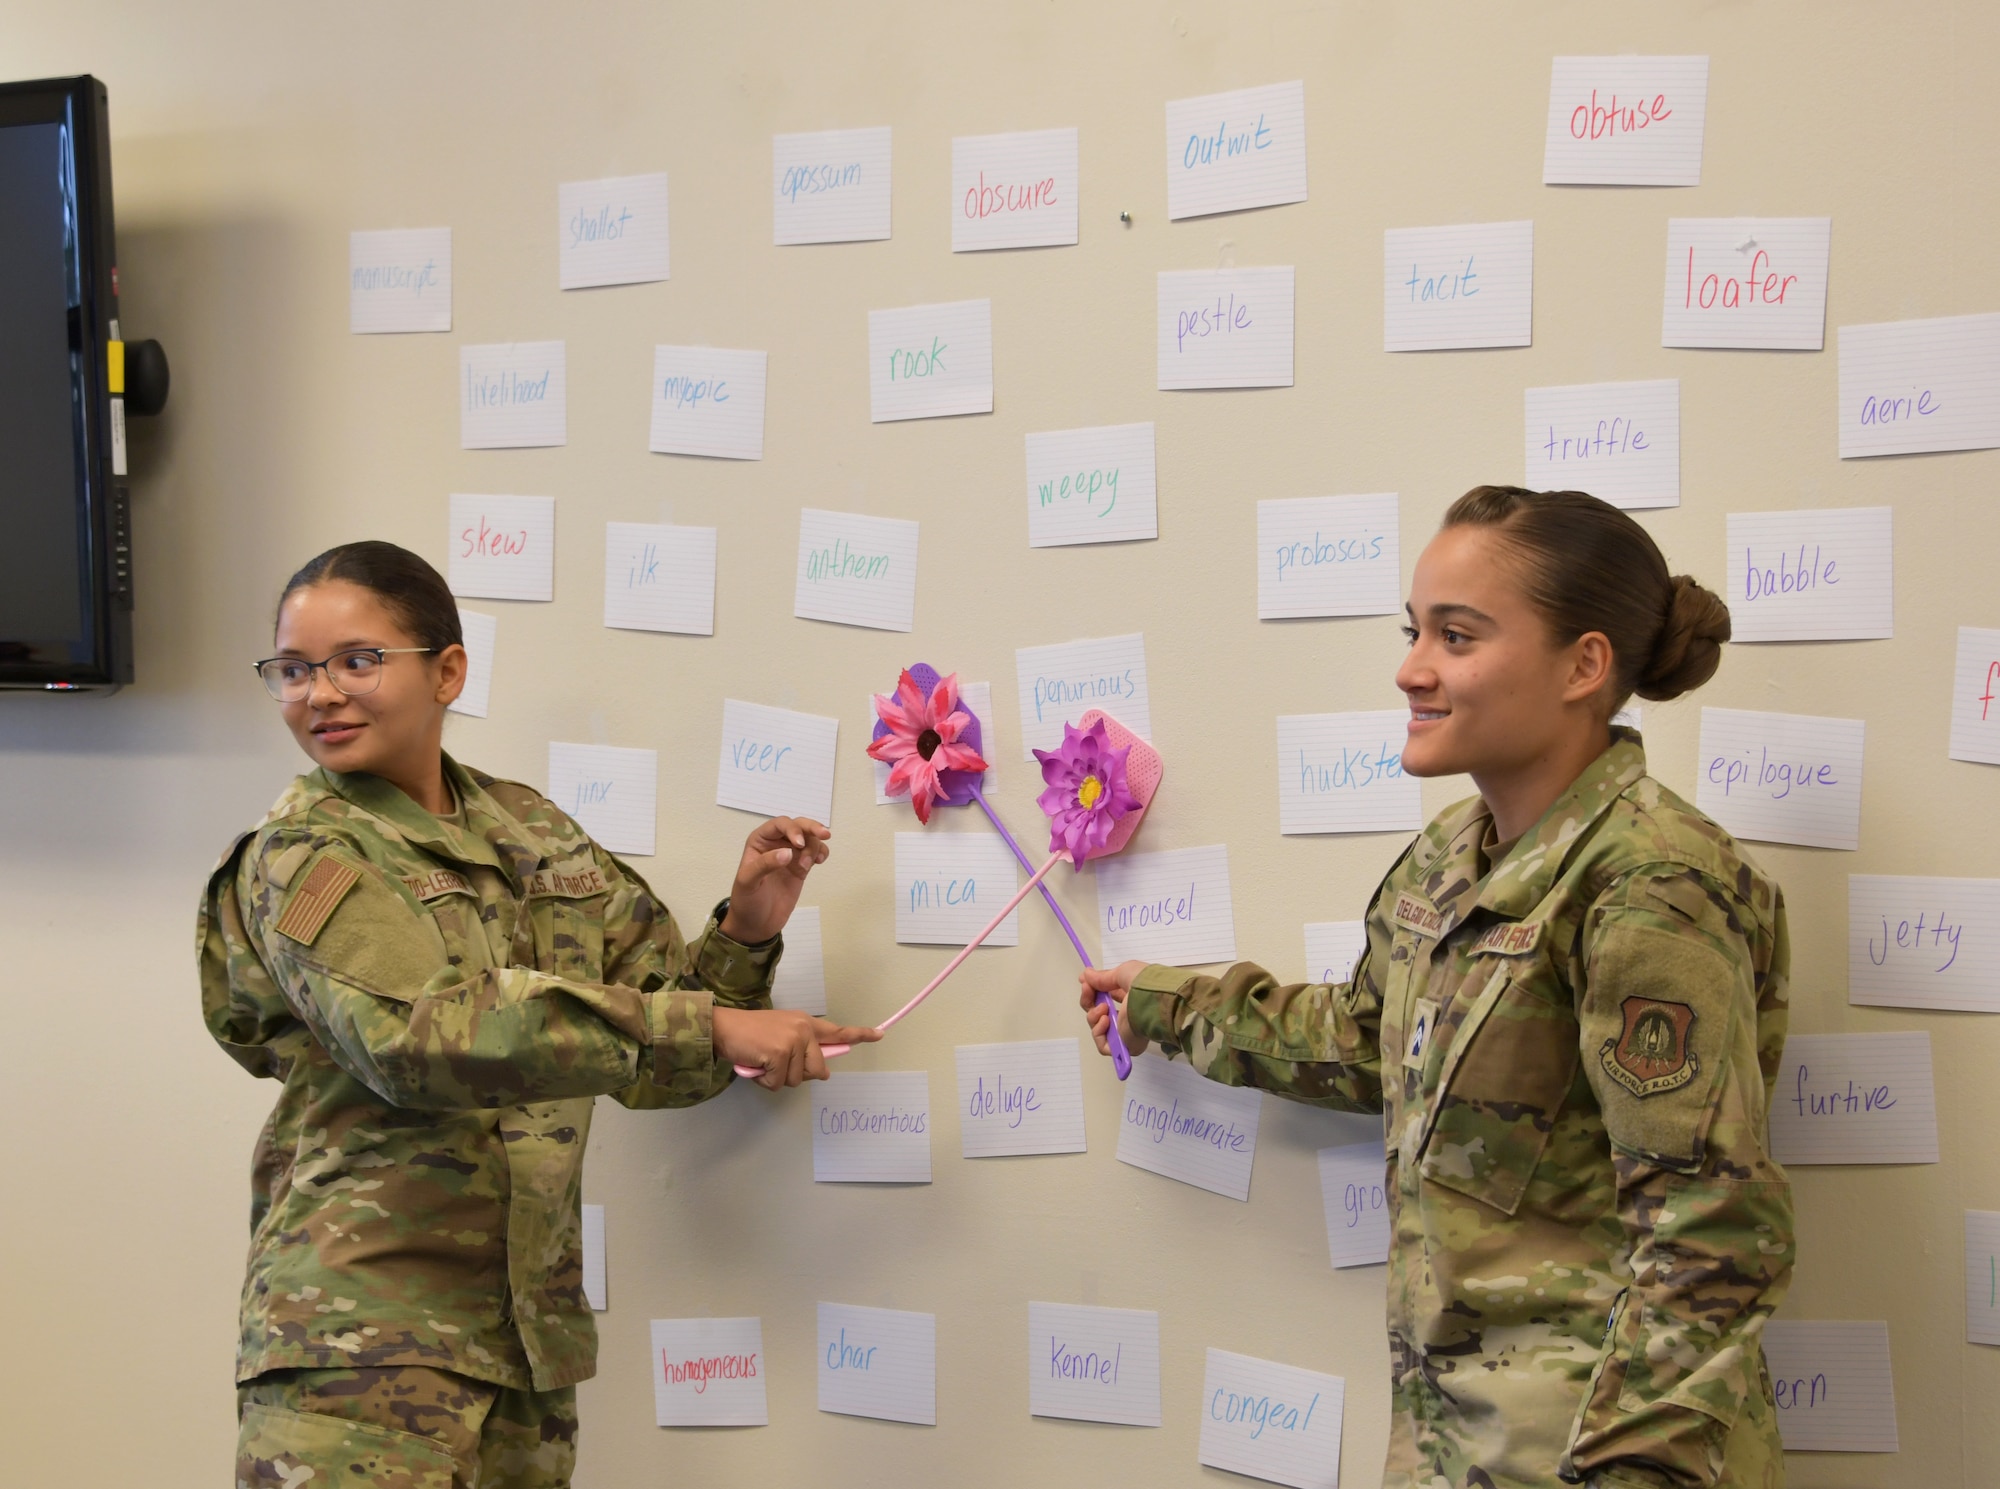 Cadet Patria Navedo and Cadet Alanis Delgado, Puerto Rico Project Language participants, play a grammar and vocabulary game during class at Maxwell Air Force Base, Alabama, June 25, 2021. The fly swat word game is a word comprehension game that gives the cadets practice and familiarity with words that would potentially be on the Air Force Officer’s Qualification Test. (U.S. Air Force photo by Senior Airman Rhonda Smith)